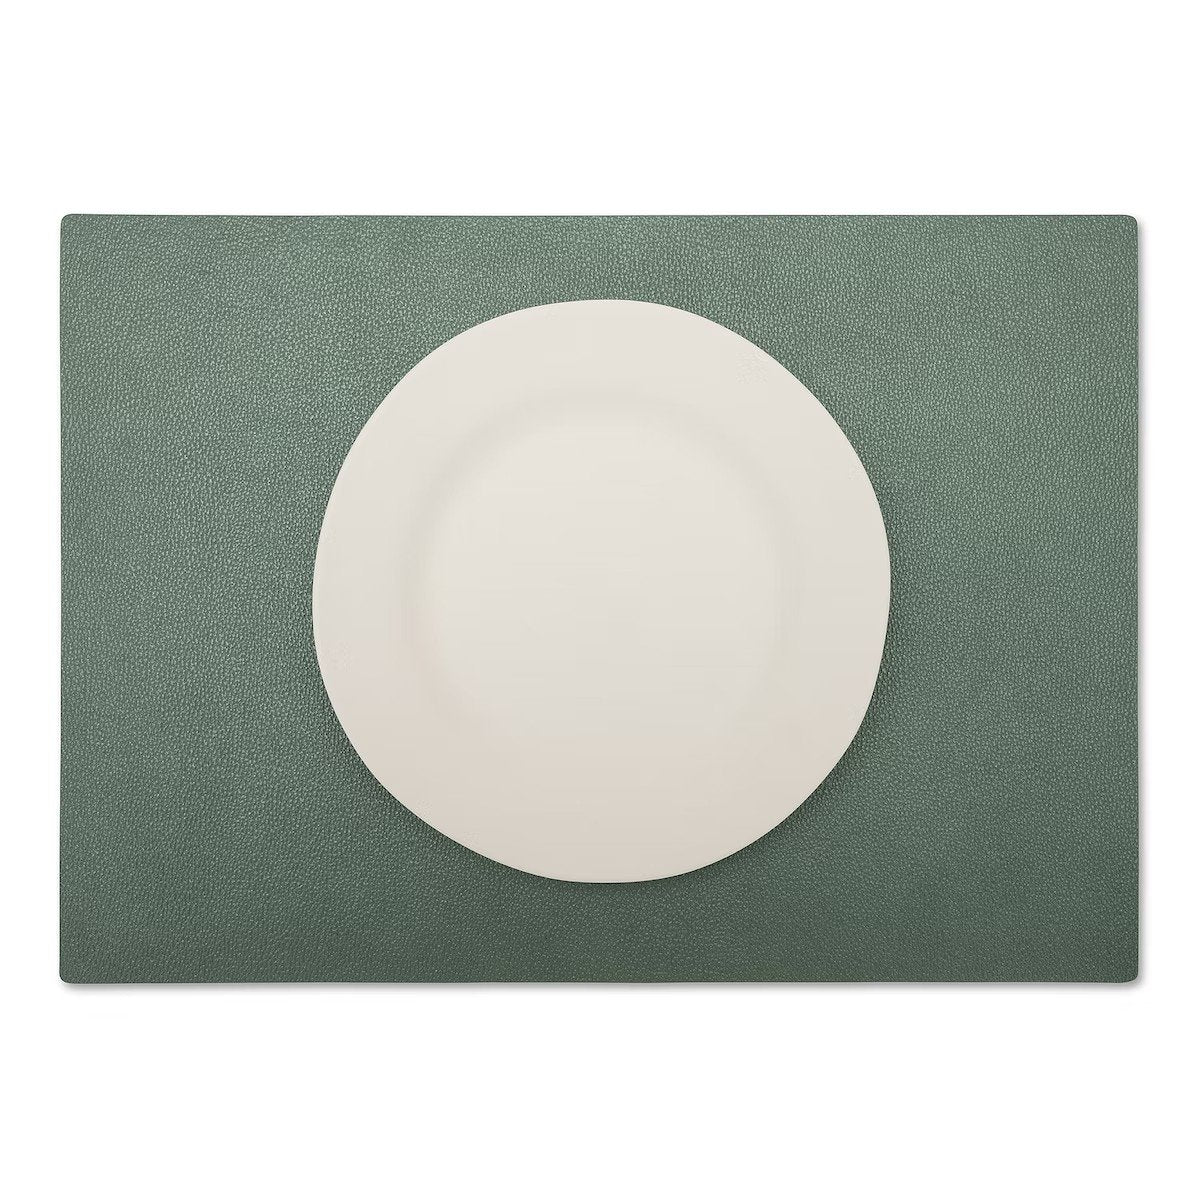 A large rectangular textured washable paper placemat in green is shown under a white plate.